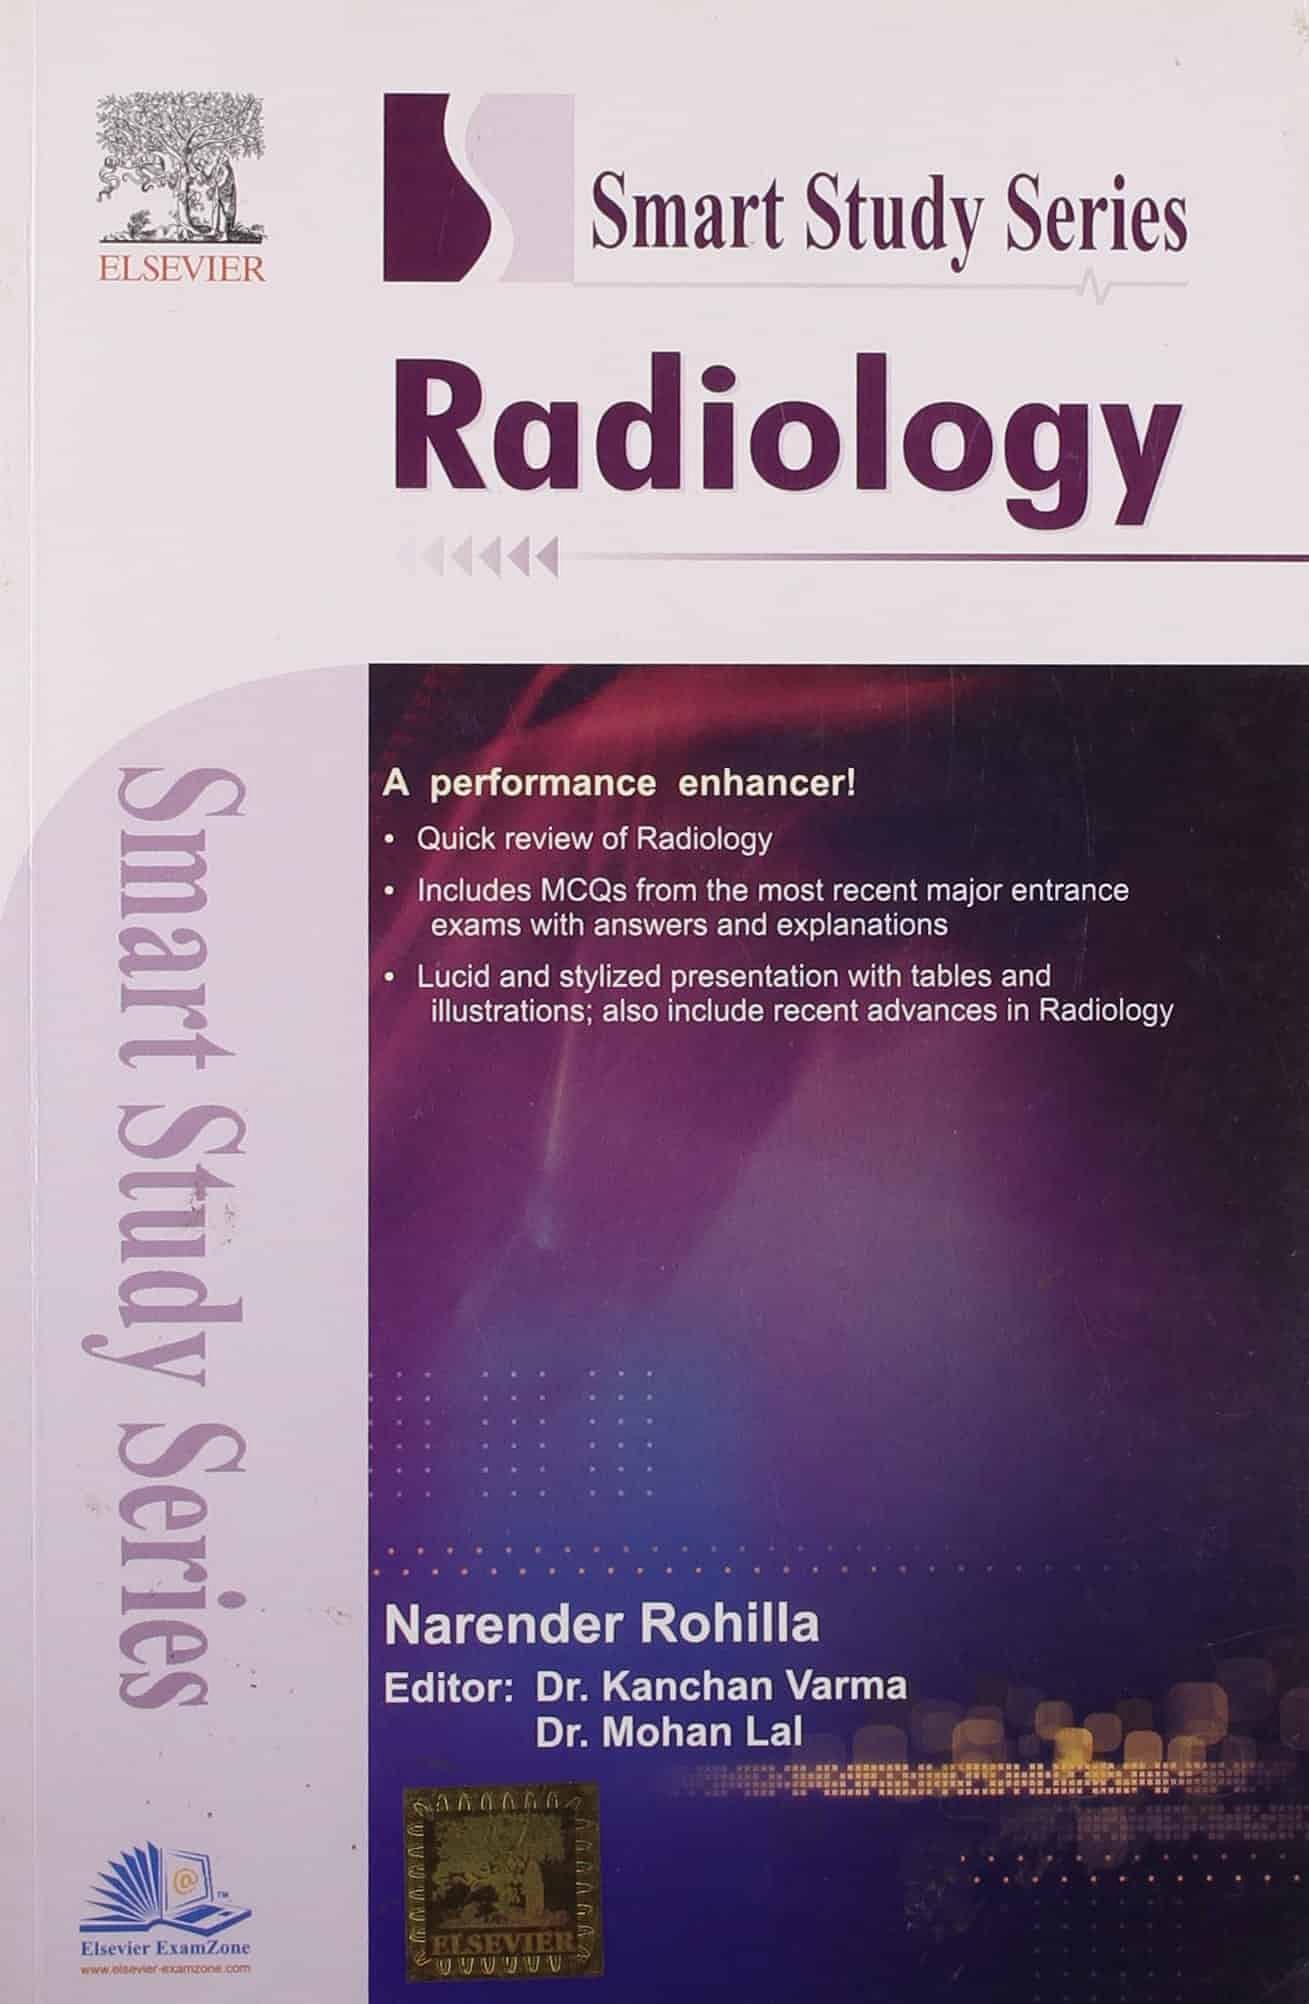 Smart Study Series Radiology by Narender Rohilla